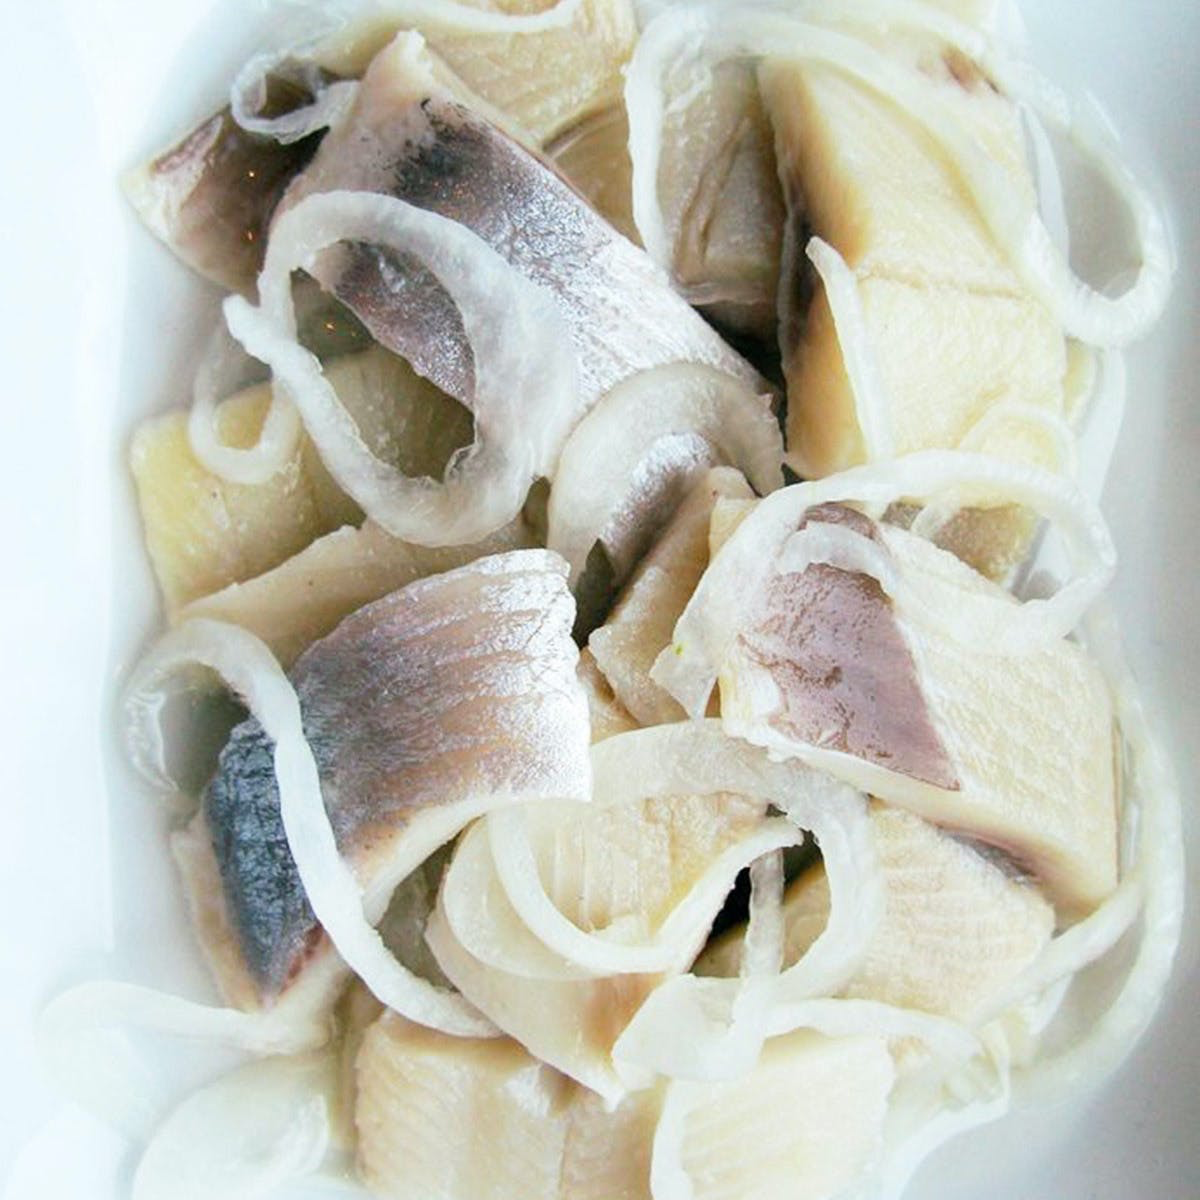 pickled herring with plain and onions